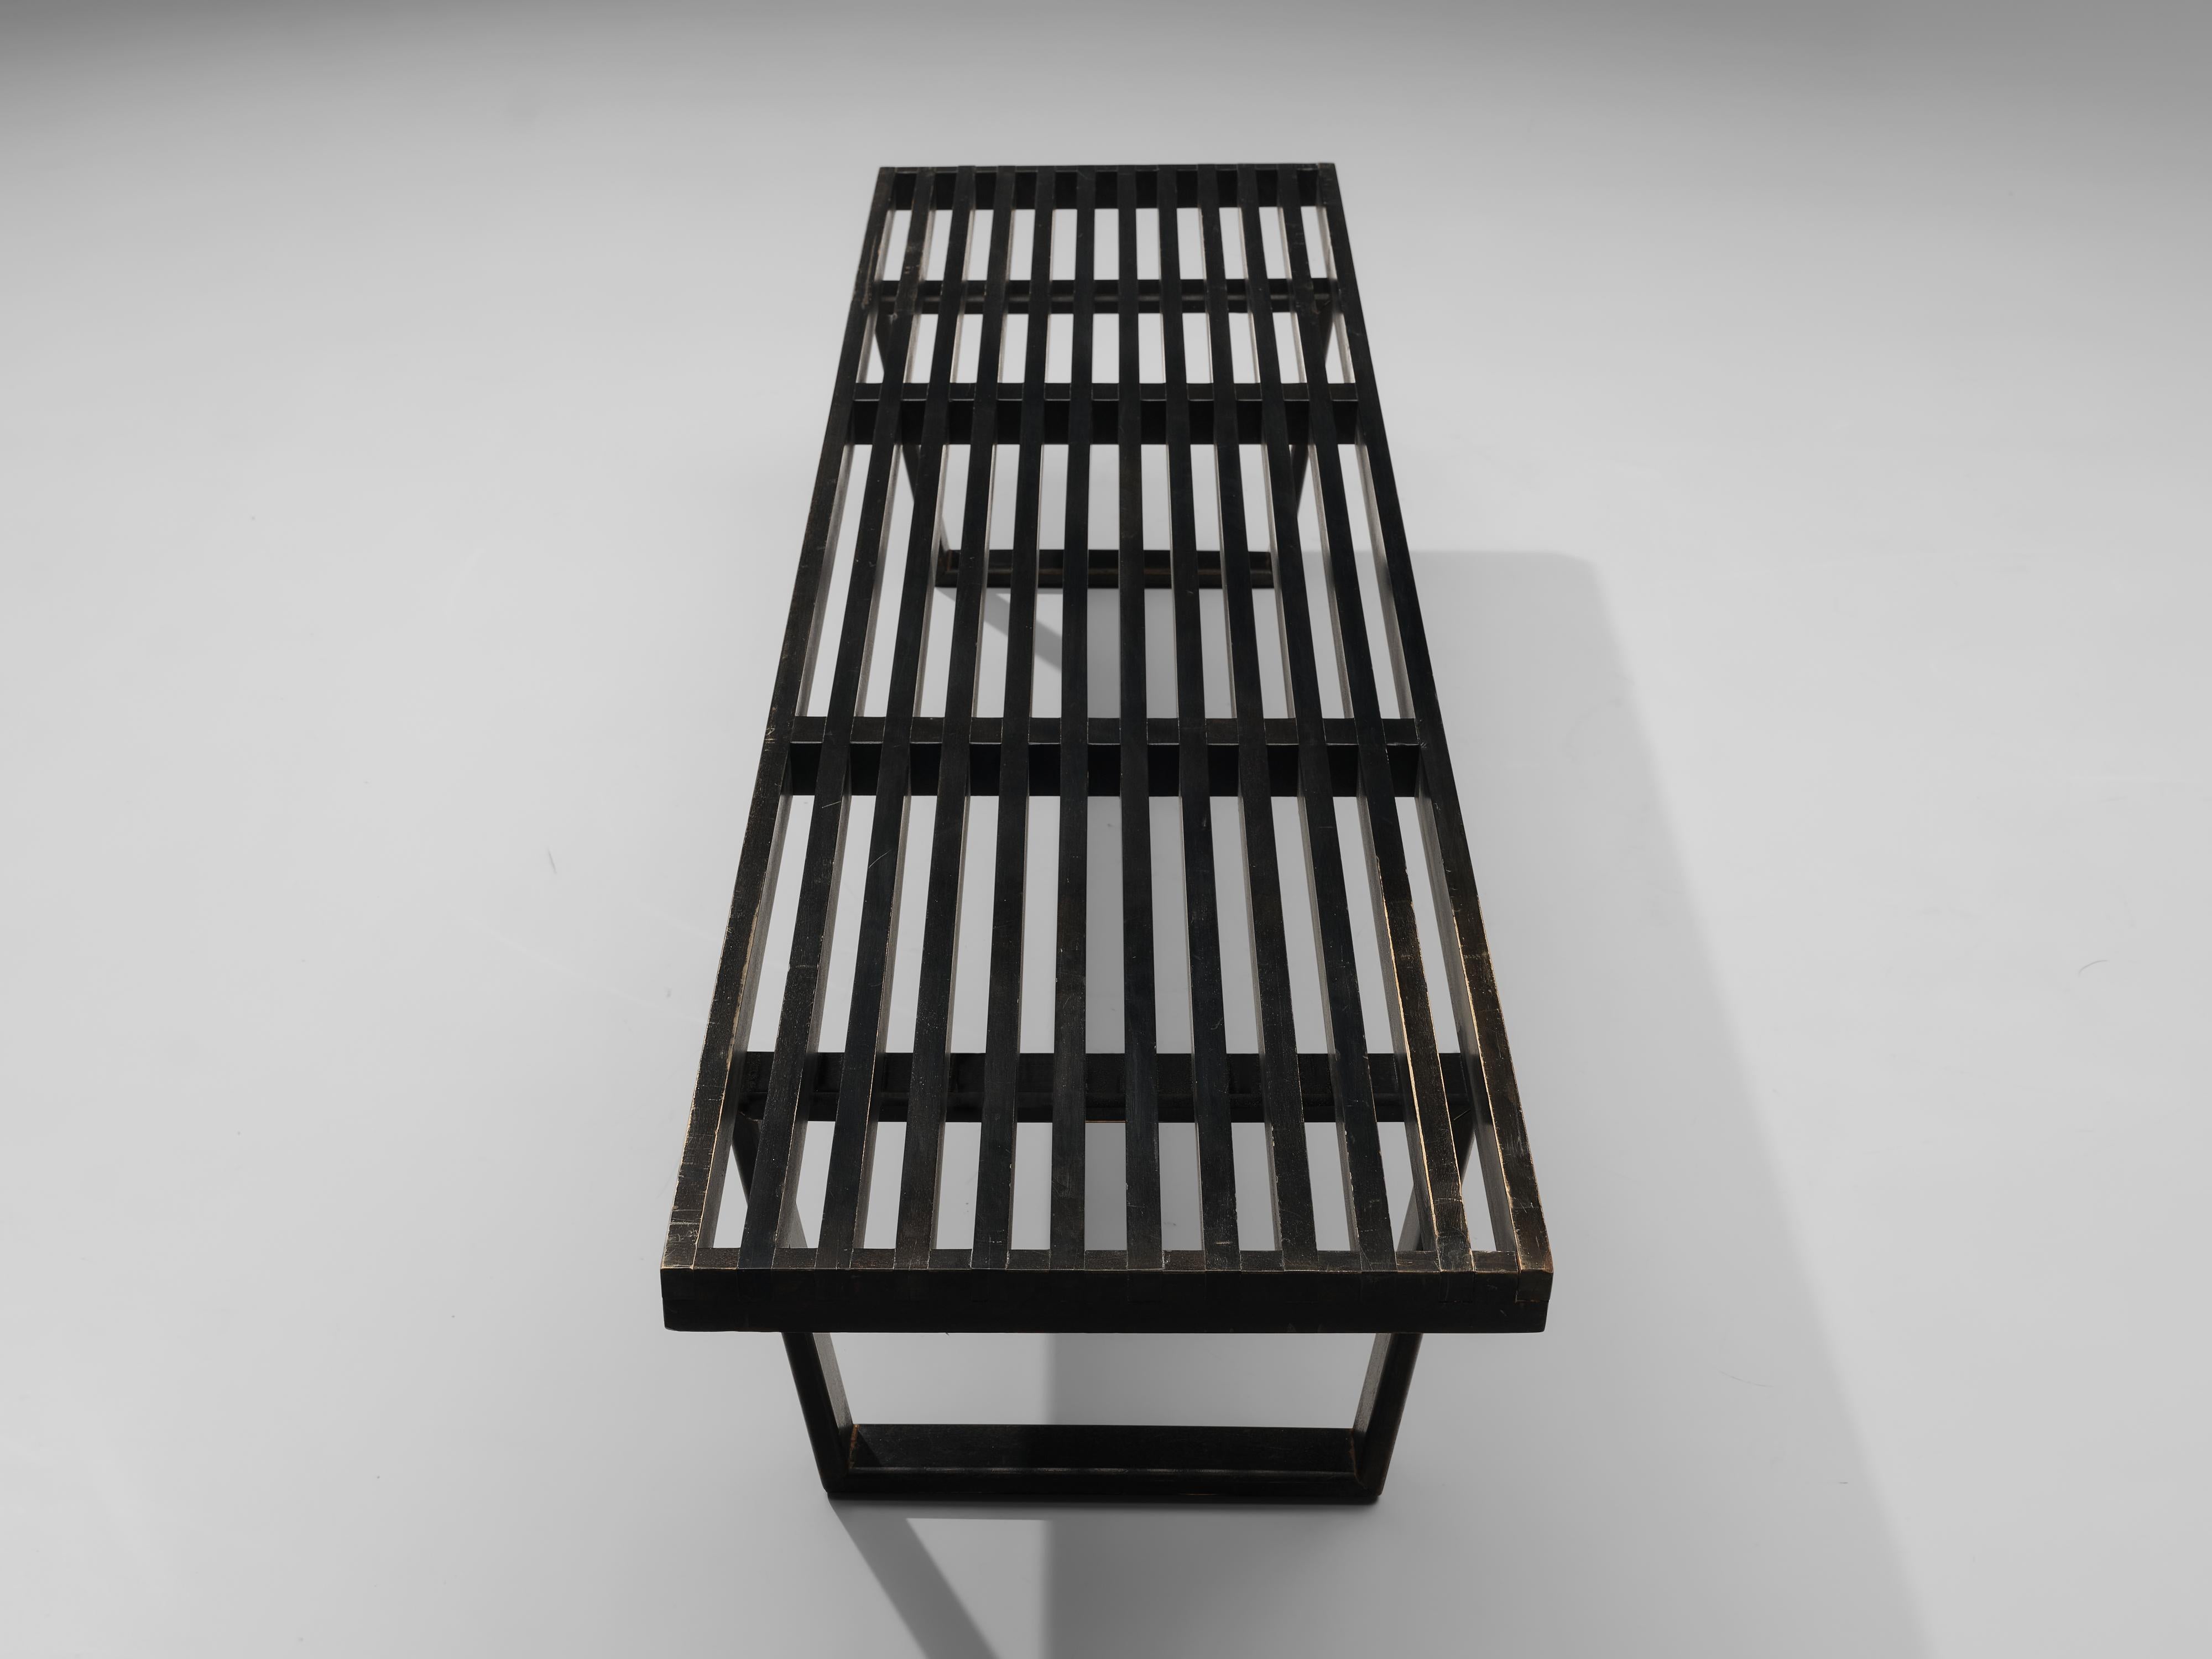 George Nelson for Herman Miller, ‘platform’ bench, black lacquered wood, United States, design 1946.

The ‘platform’ bench was part of the first collection that George Nelson designed for Herman Miller. The rectilinear lines of the wooden slats in